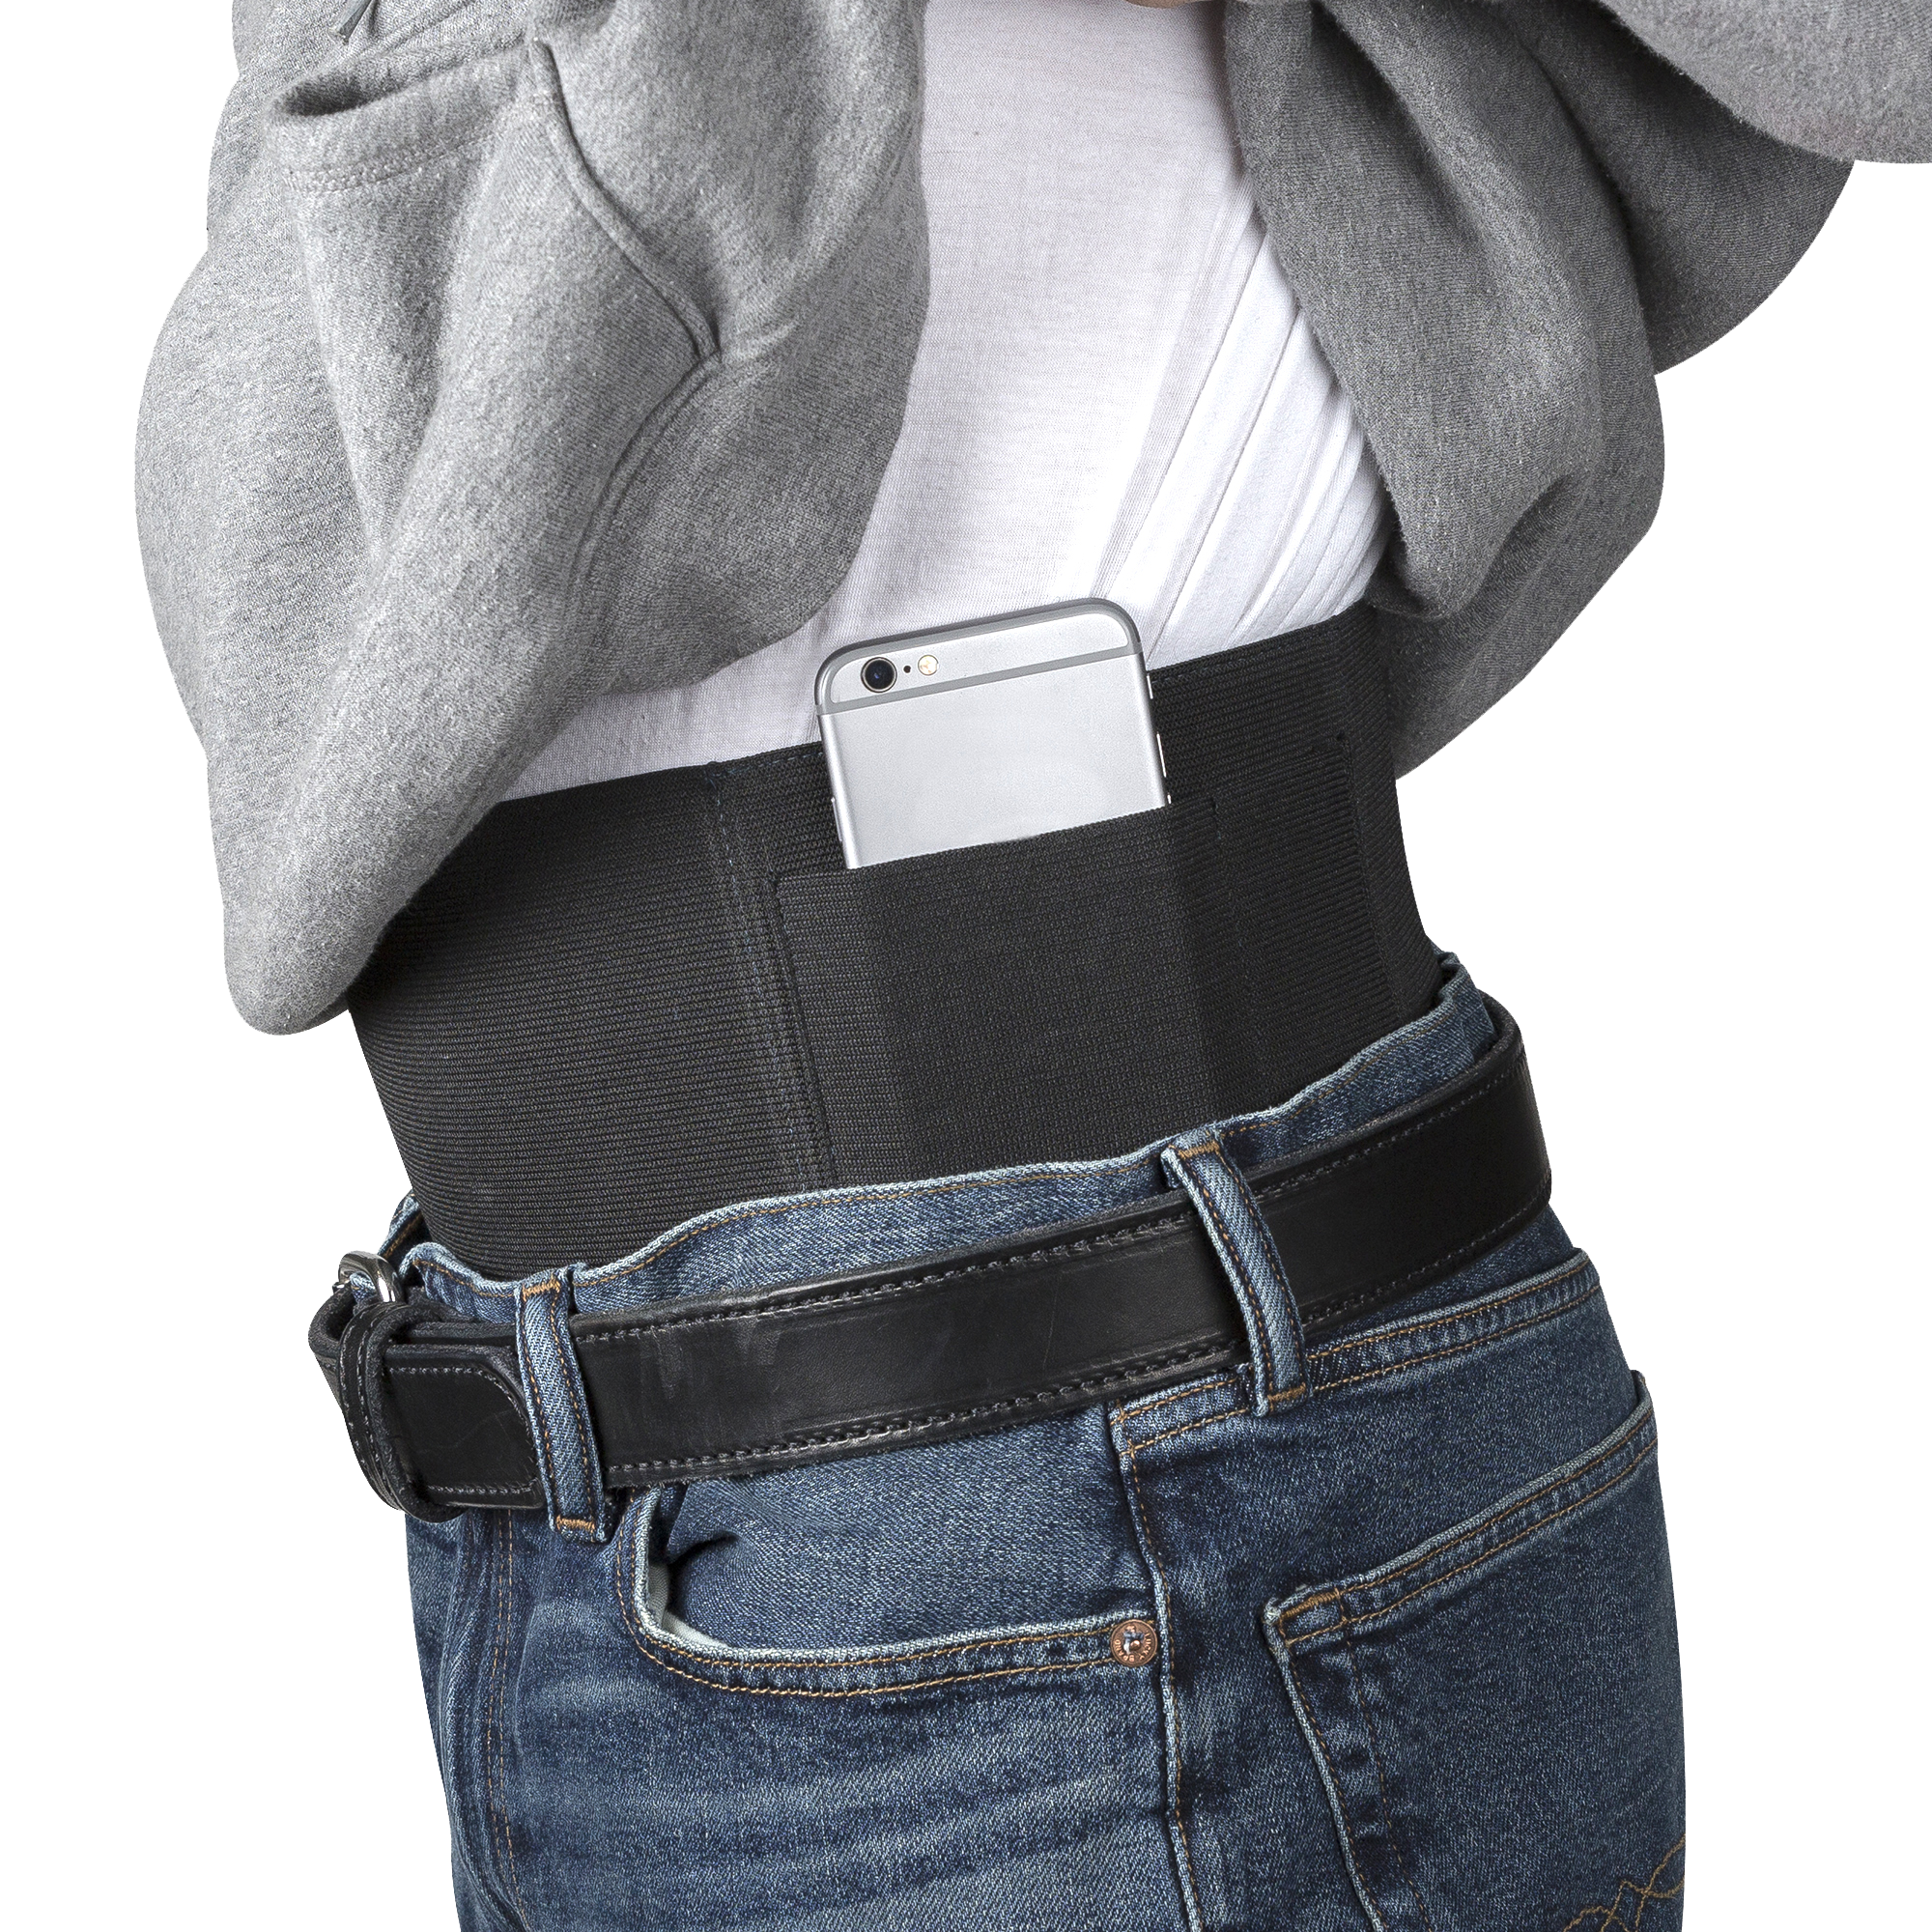 GoZier Tactical Belly Band Holsters for Concealed Carry